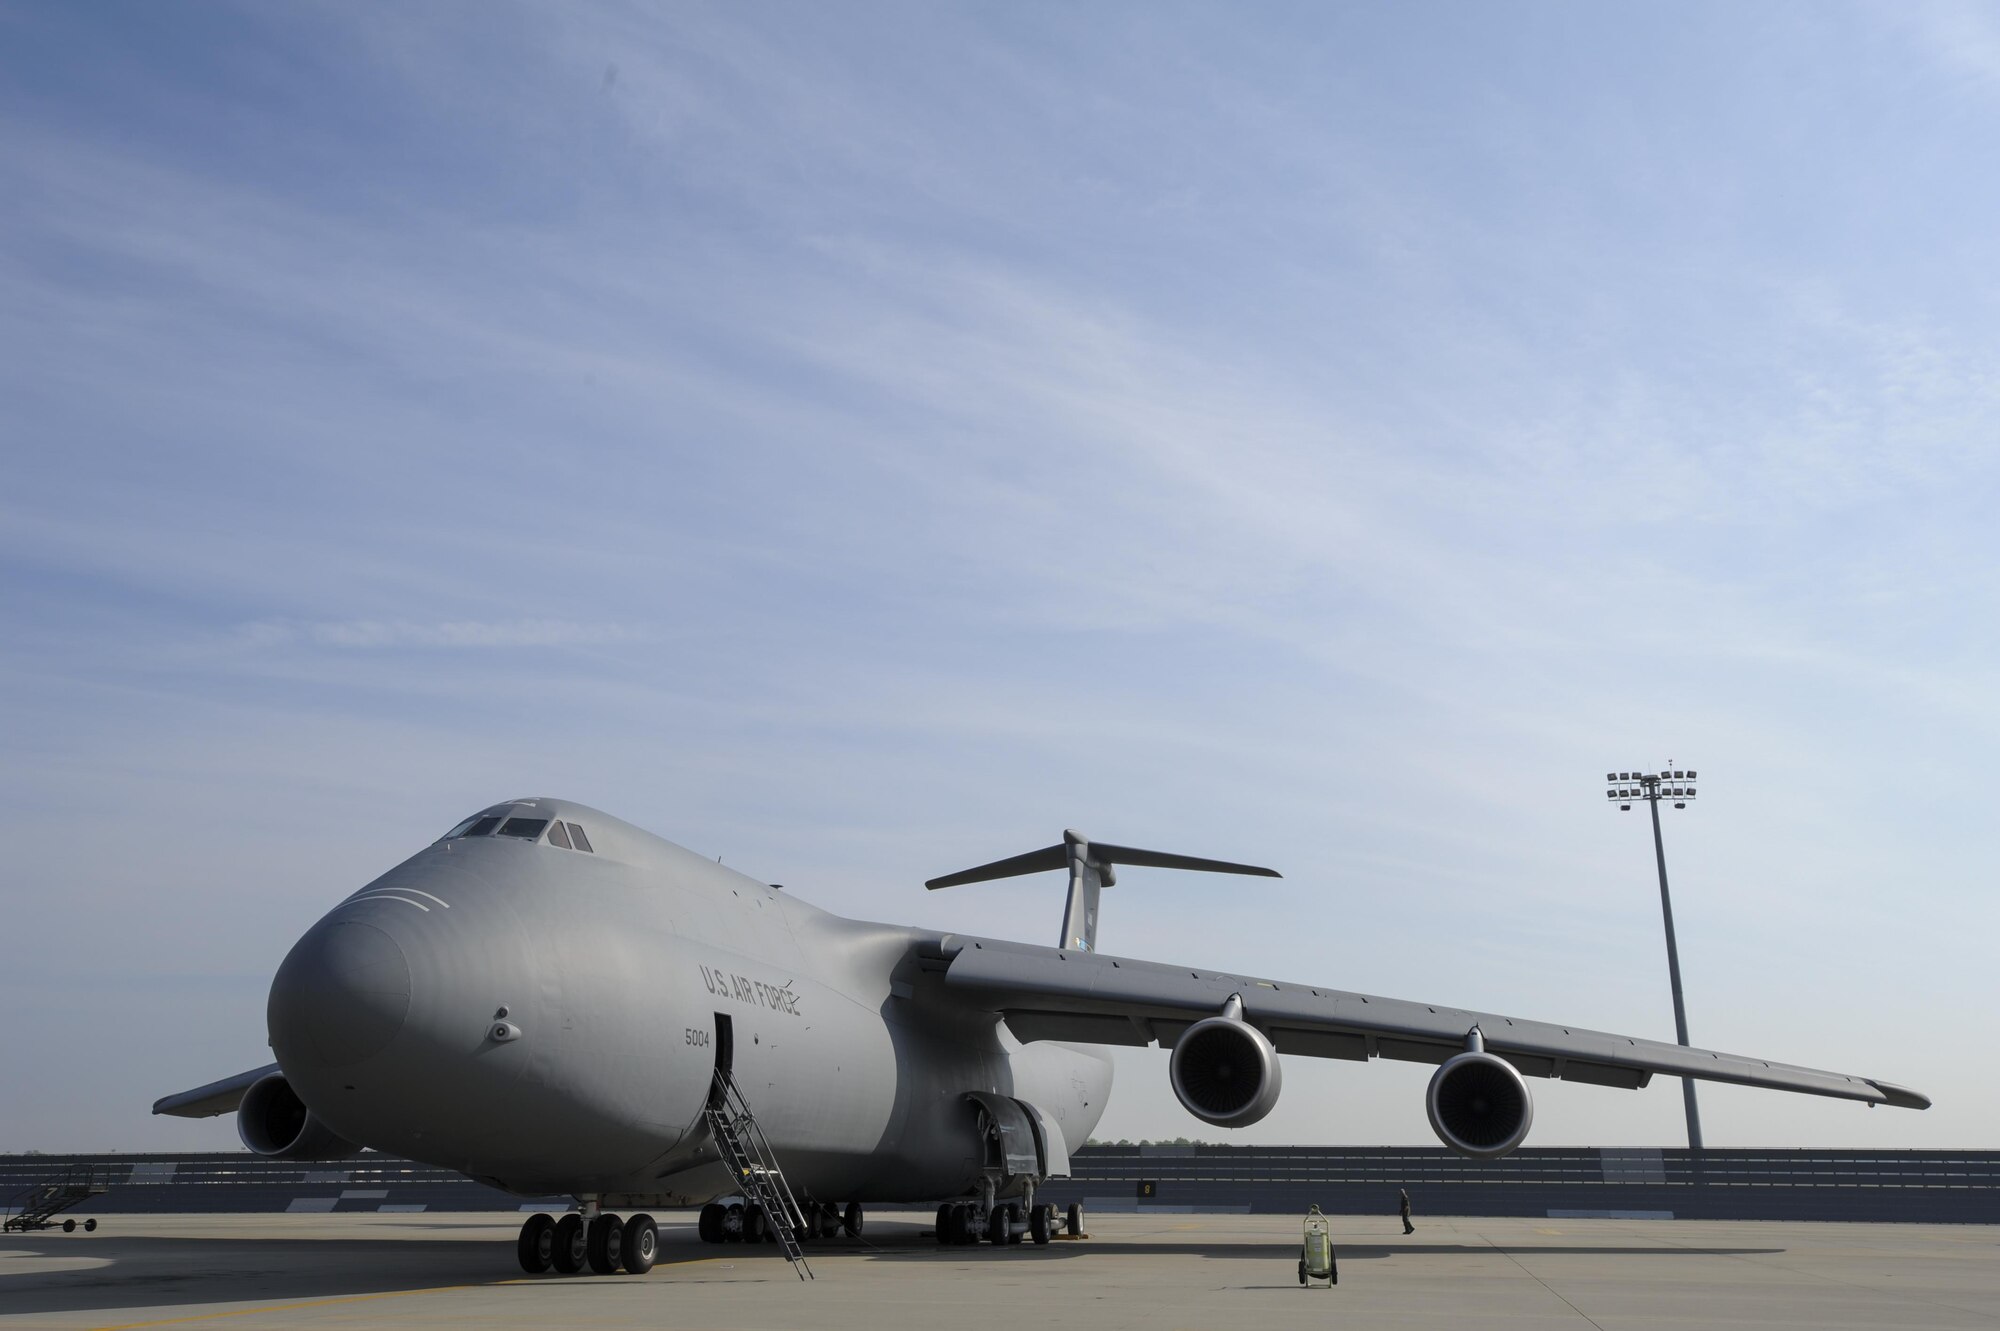 A C-5M Super Galaxy assigned to the 436th Airlift Wing out of Dover Air Force Base, Del., sits on the flightline March 29, 2017, at Robins Air Force Base, Ga. The aircraft was at Robins undergoing programmed depot maintenance, a process designed to ensure aircraft are safe and mission ready. (U.S. Air Force photo by Jamal D. Sutter)